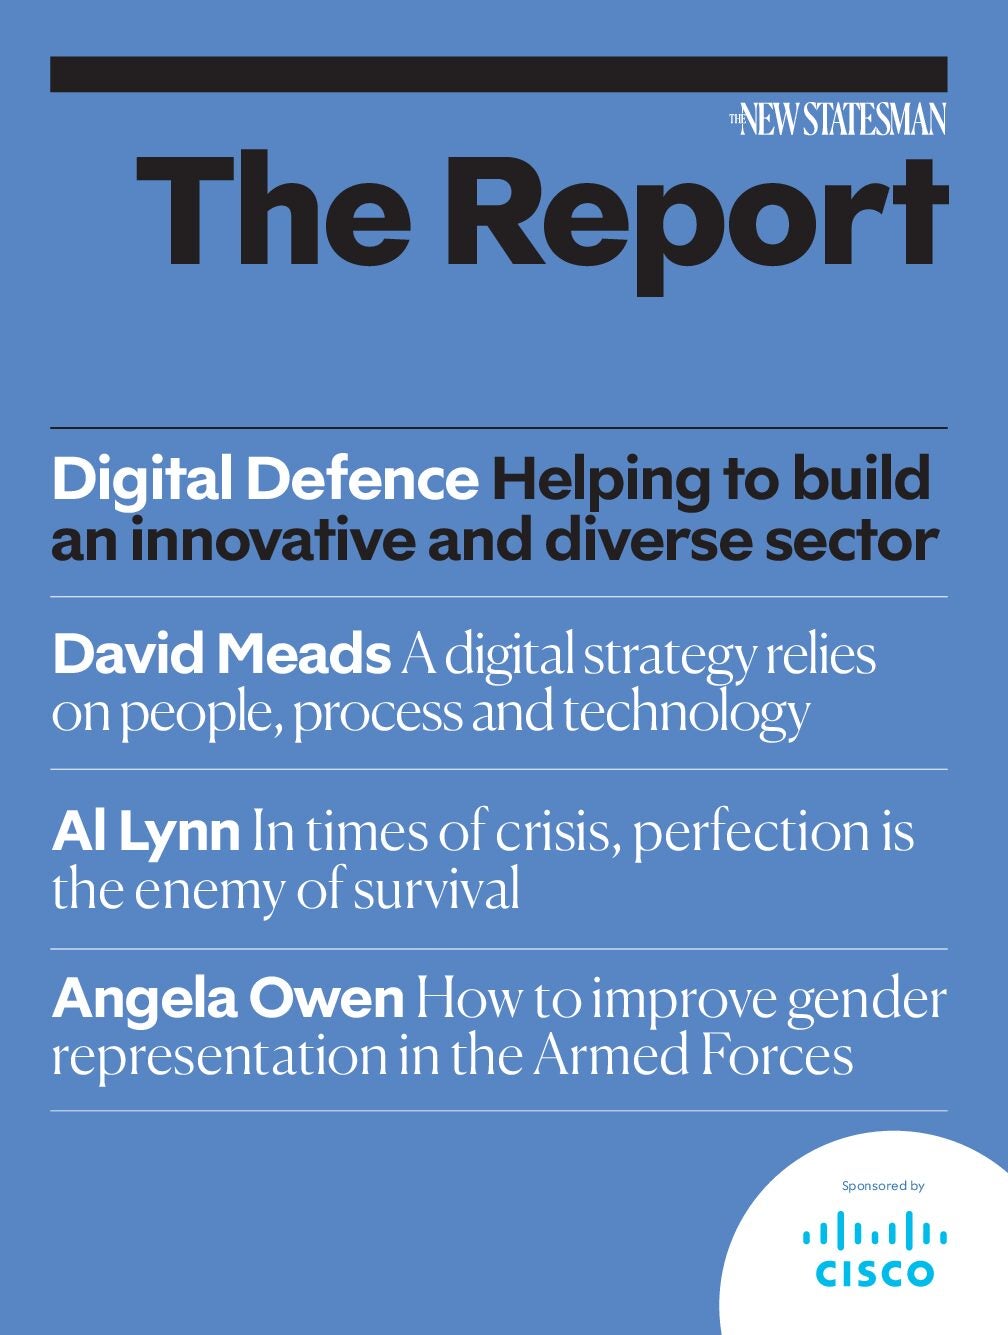 Digital Defence: Building an innovative and diverse sector